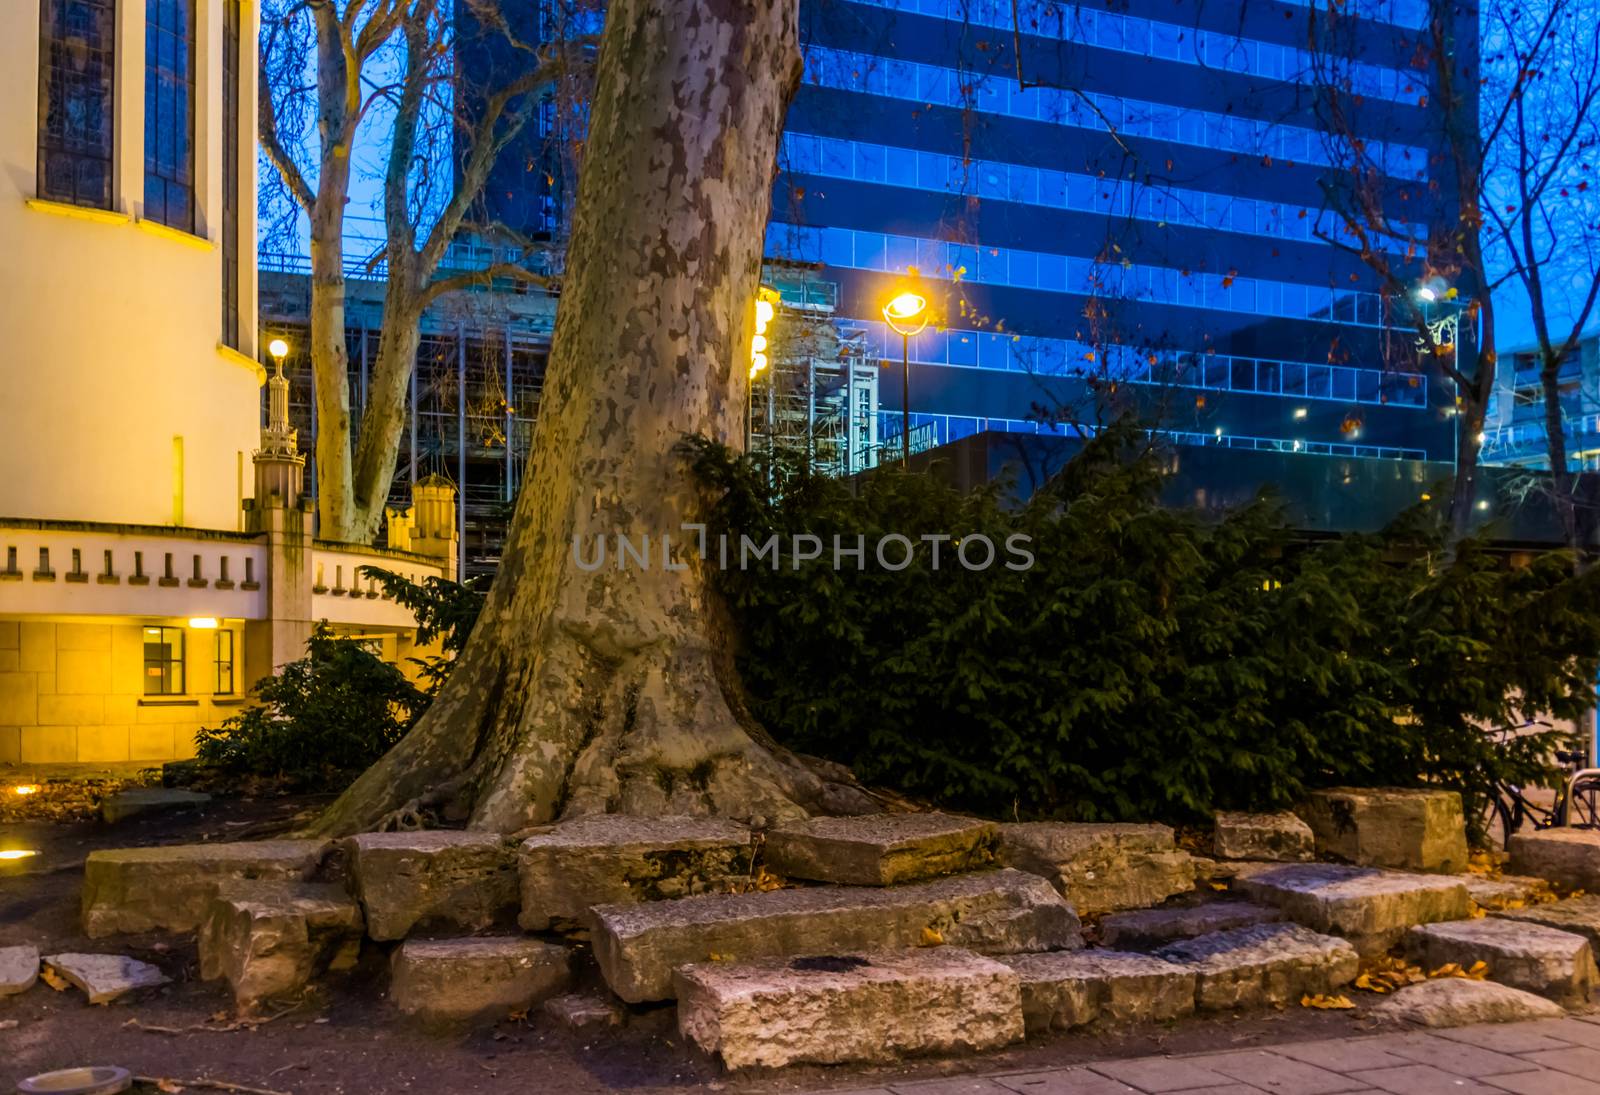 Tree trunk with a conifer bush, Nature decorations in the streets of Tilburg, City center, Urban scenery and architecture by charlottebleijenberg